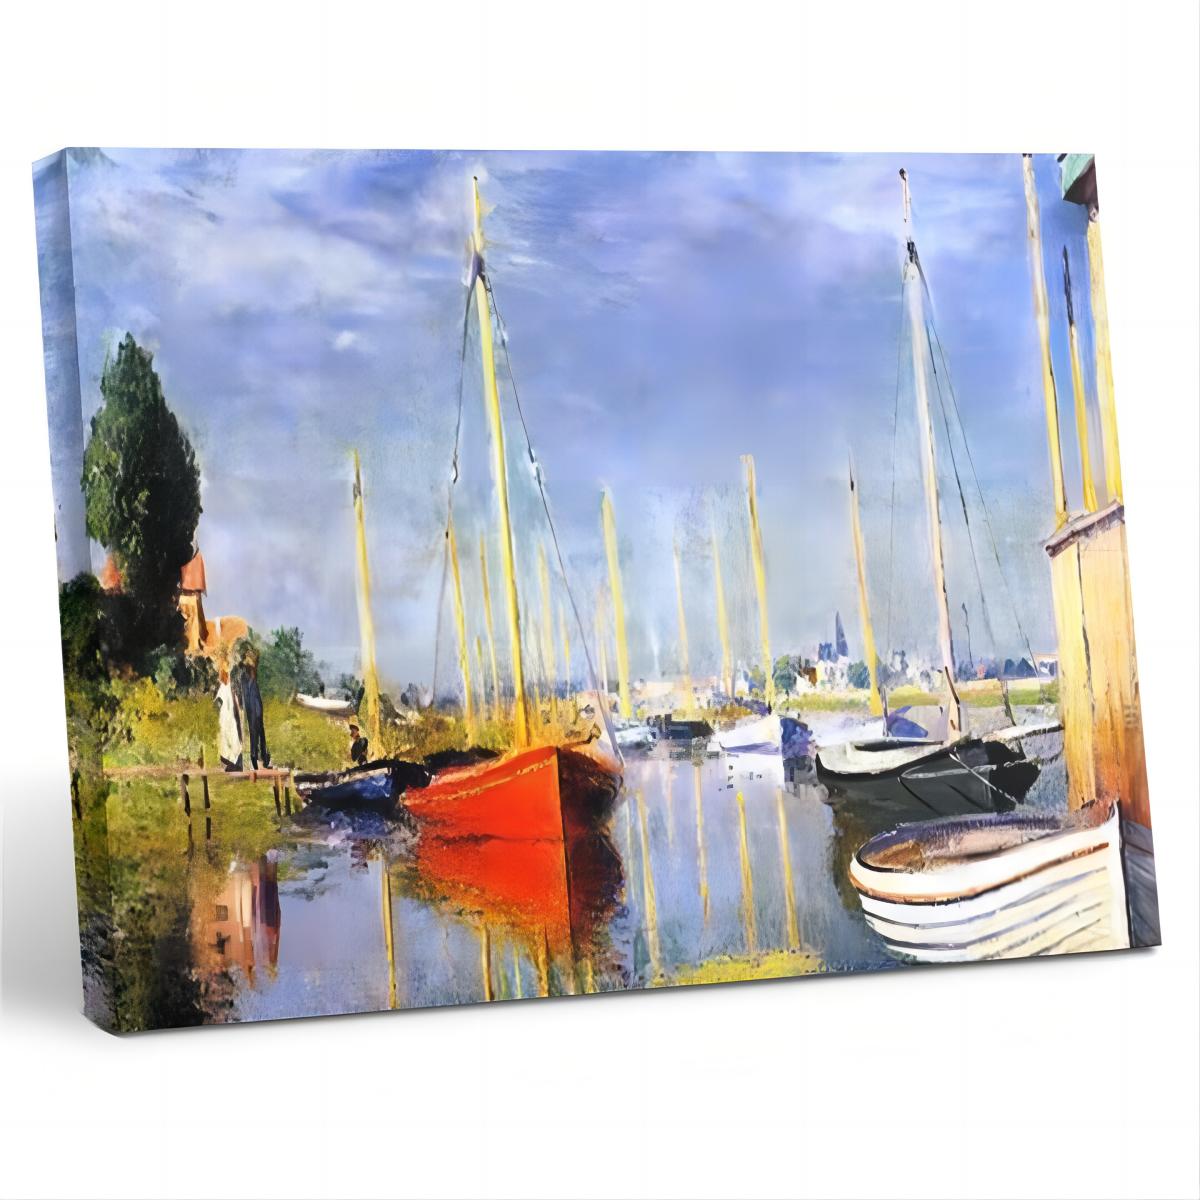 Yachts at Argenteuil - Vintage Wall Art Prints Decor For Living Room